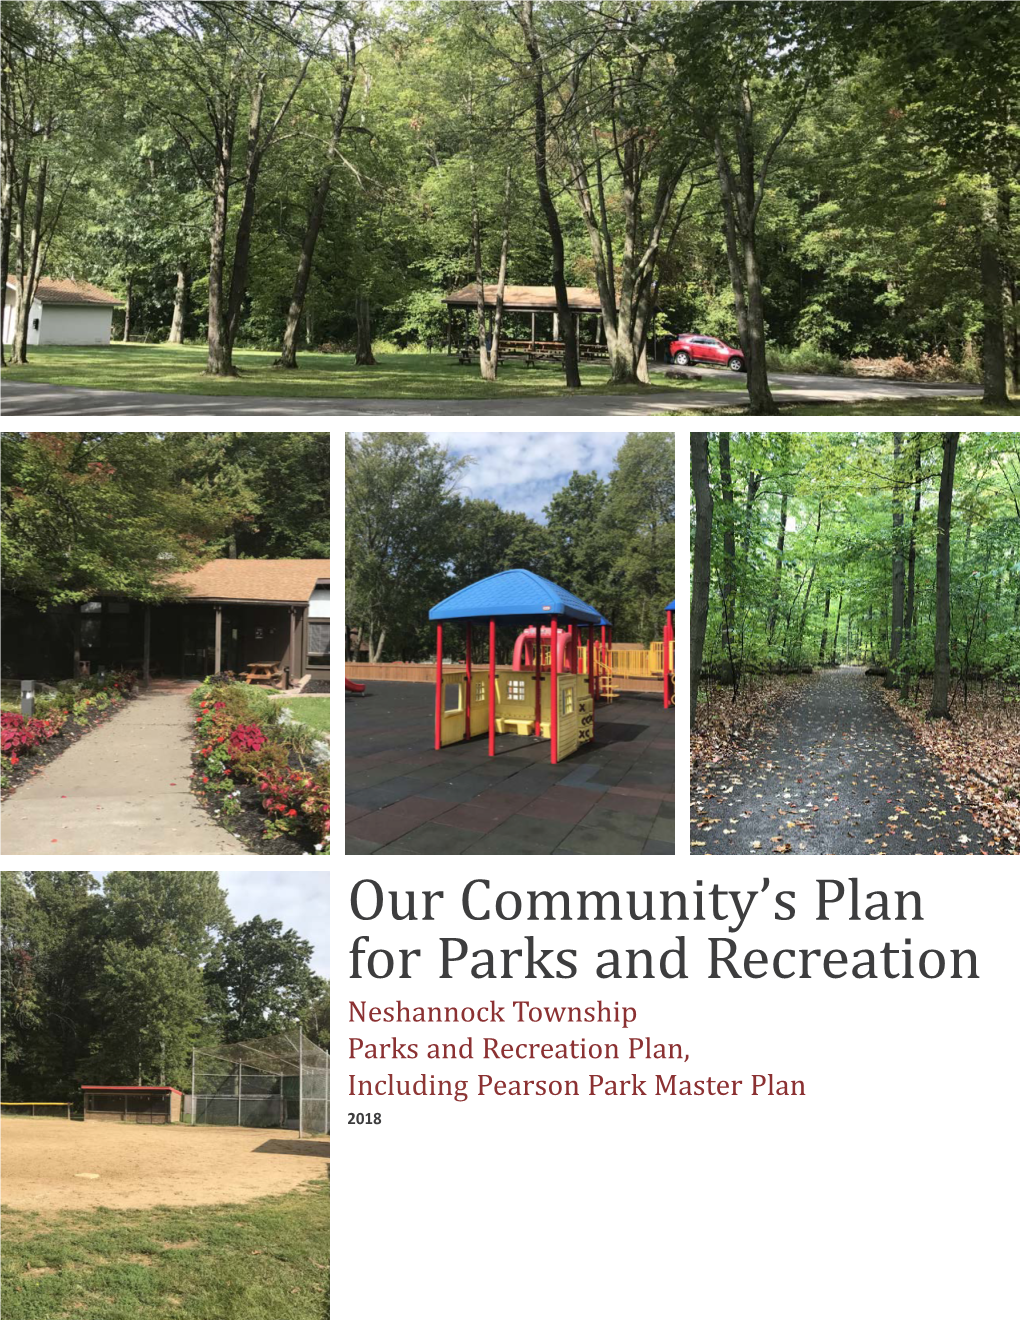 Our Community's Plan for Parks and Recreation